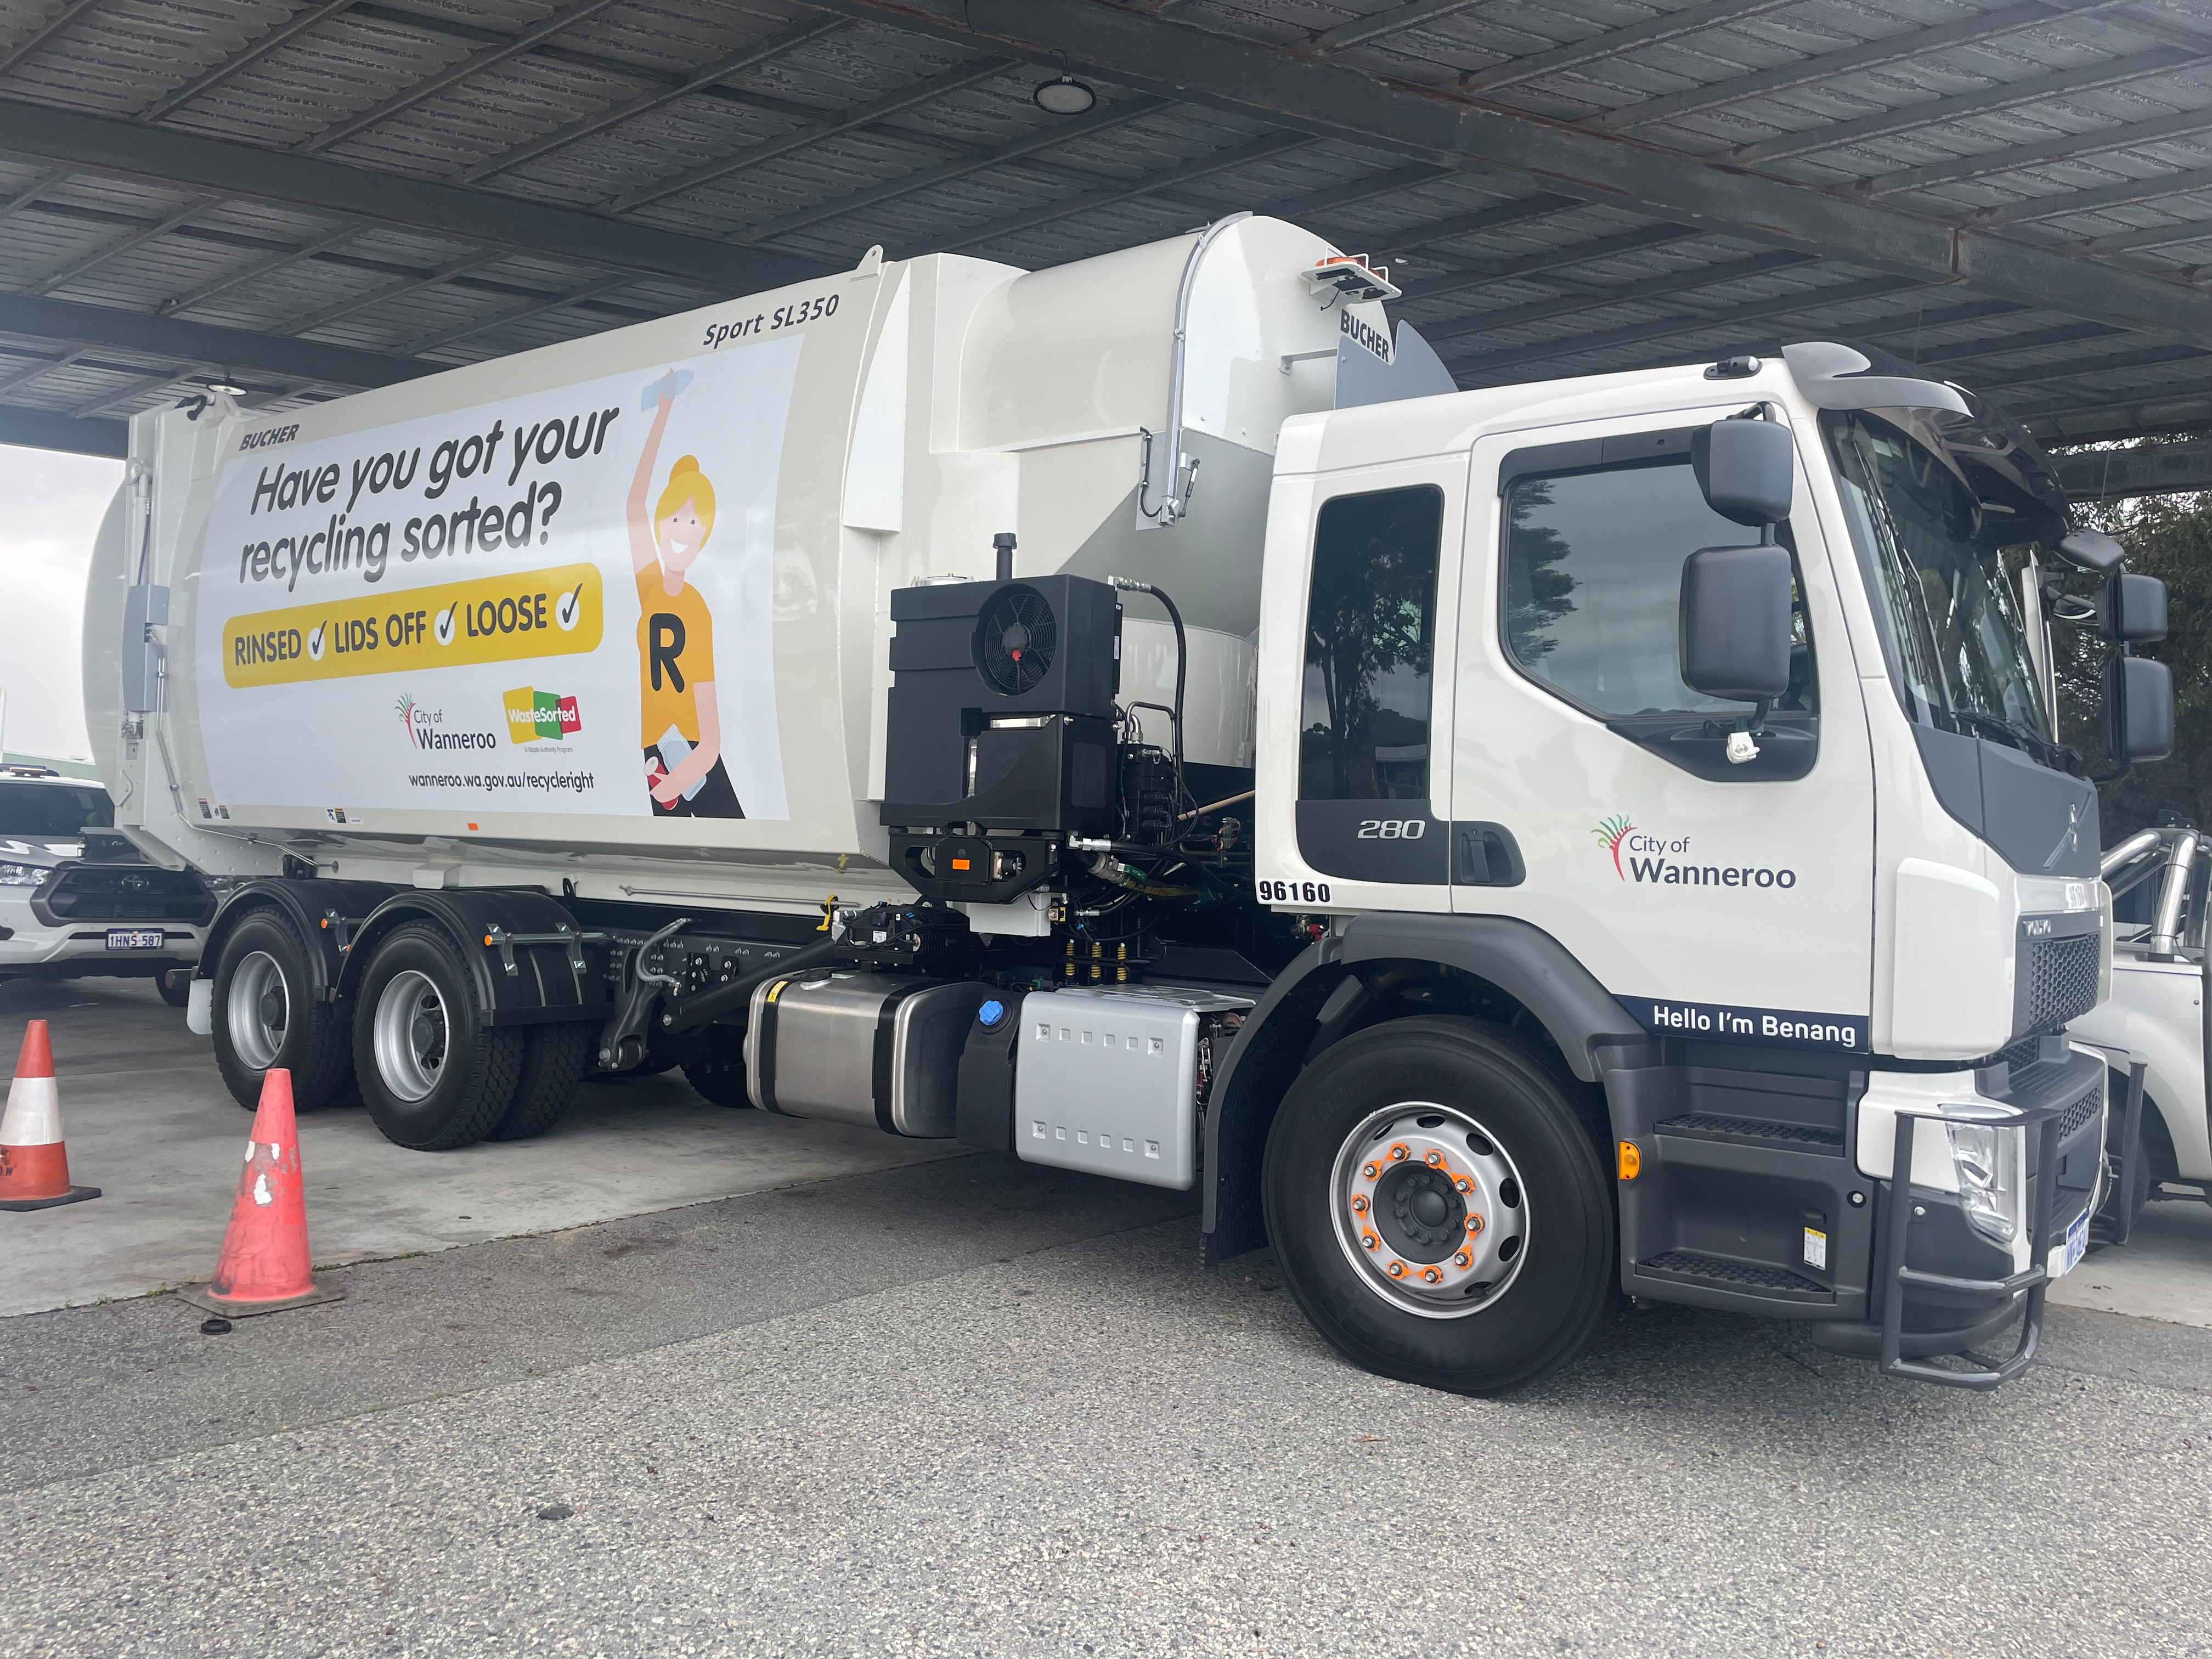 City of Wanneroo Recycling Truck at the operations centre 